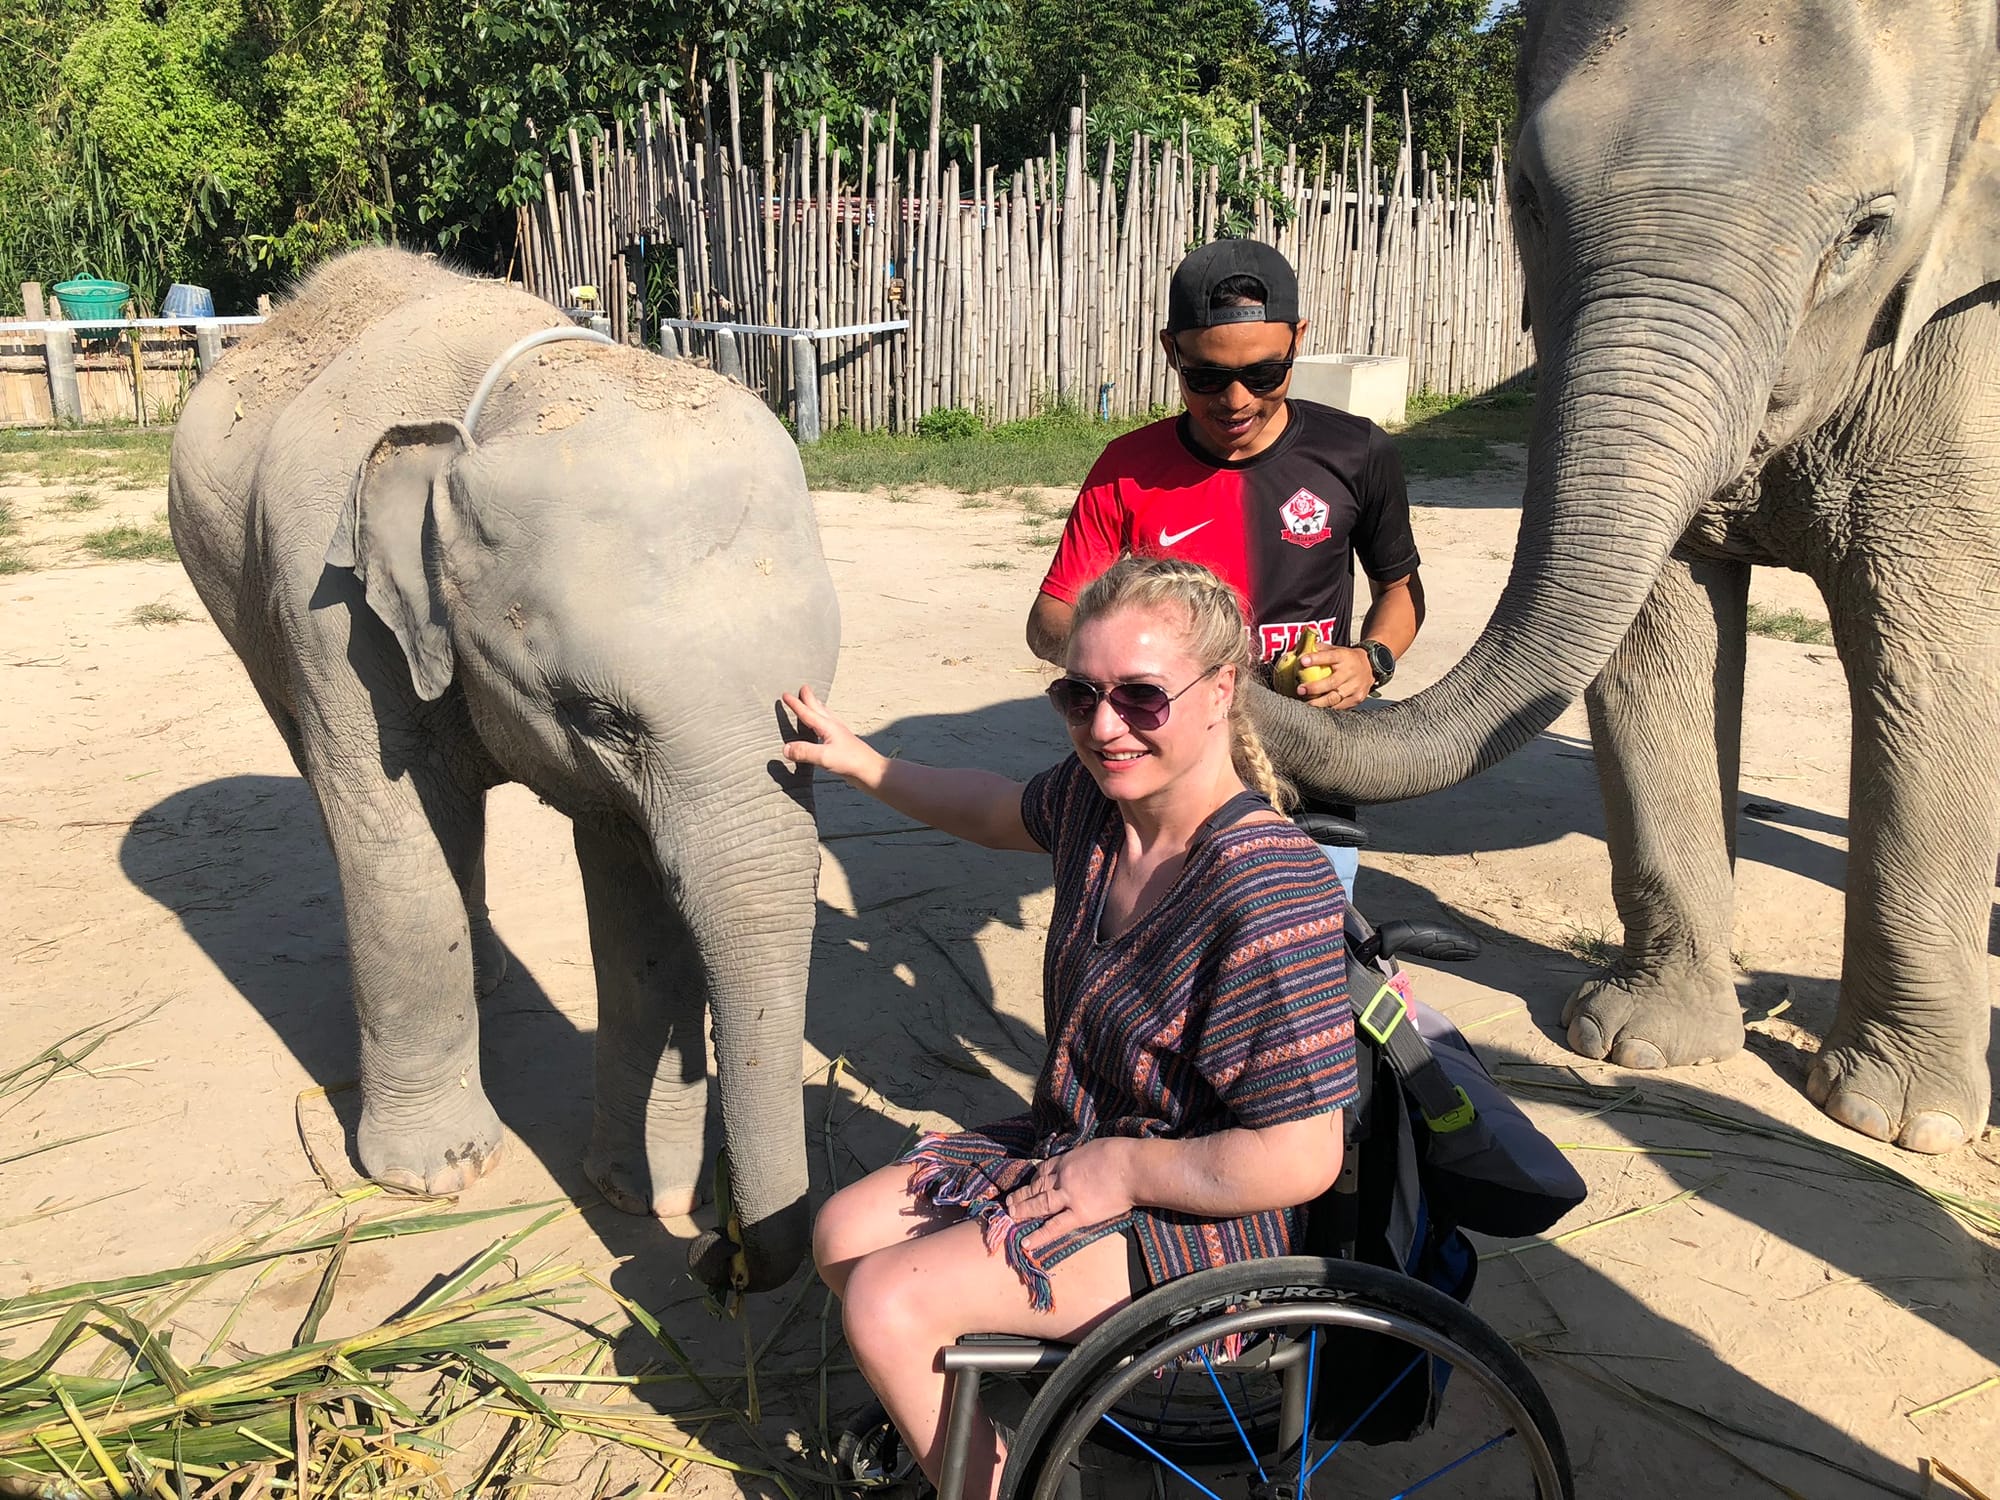 Wheelchair-user meeting the local elephants in Thailand